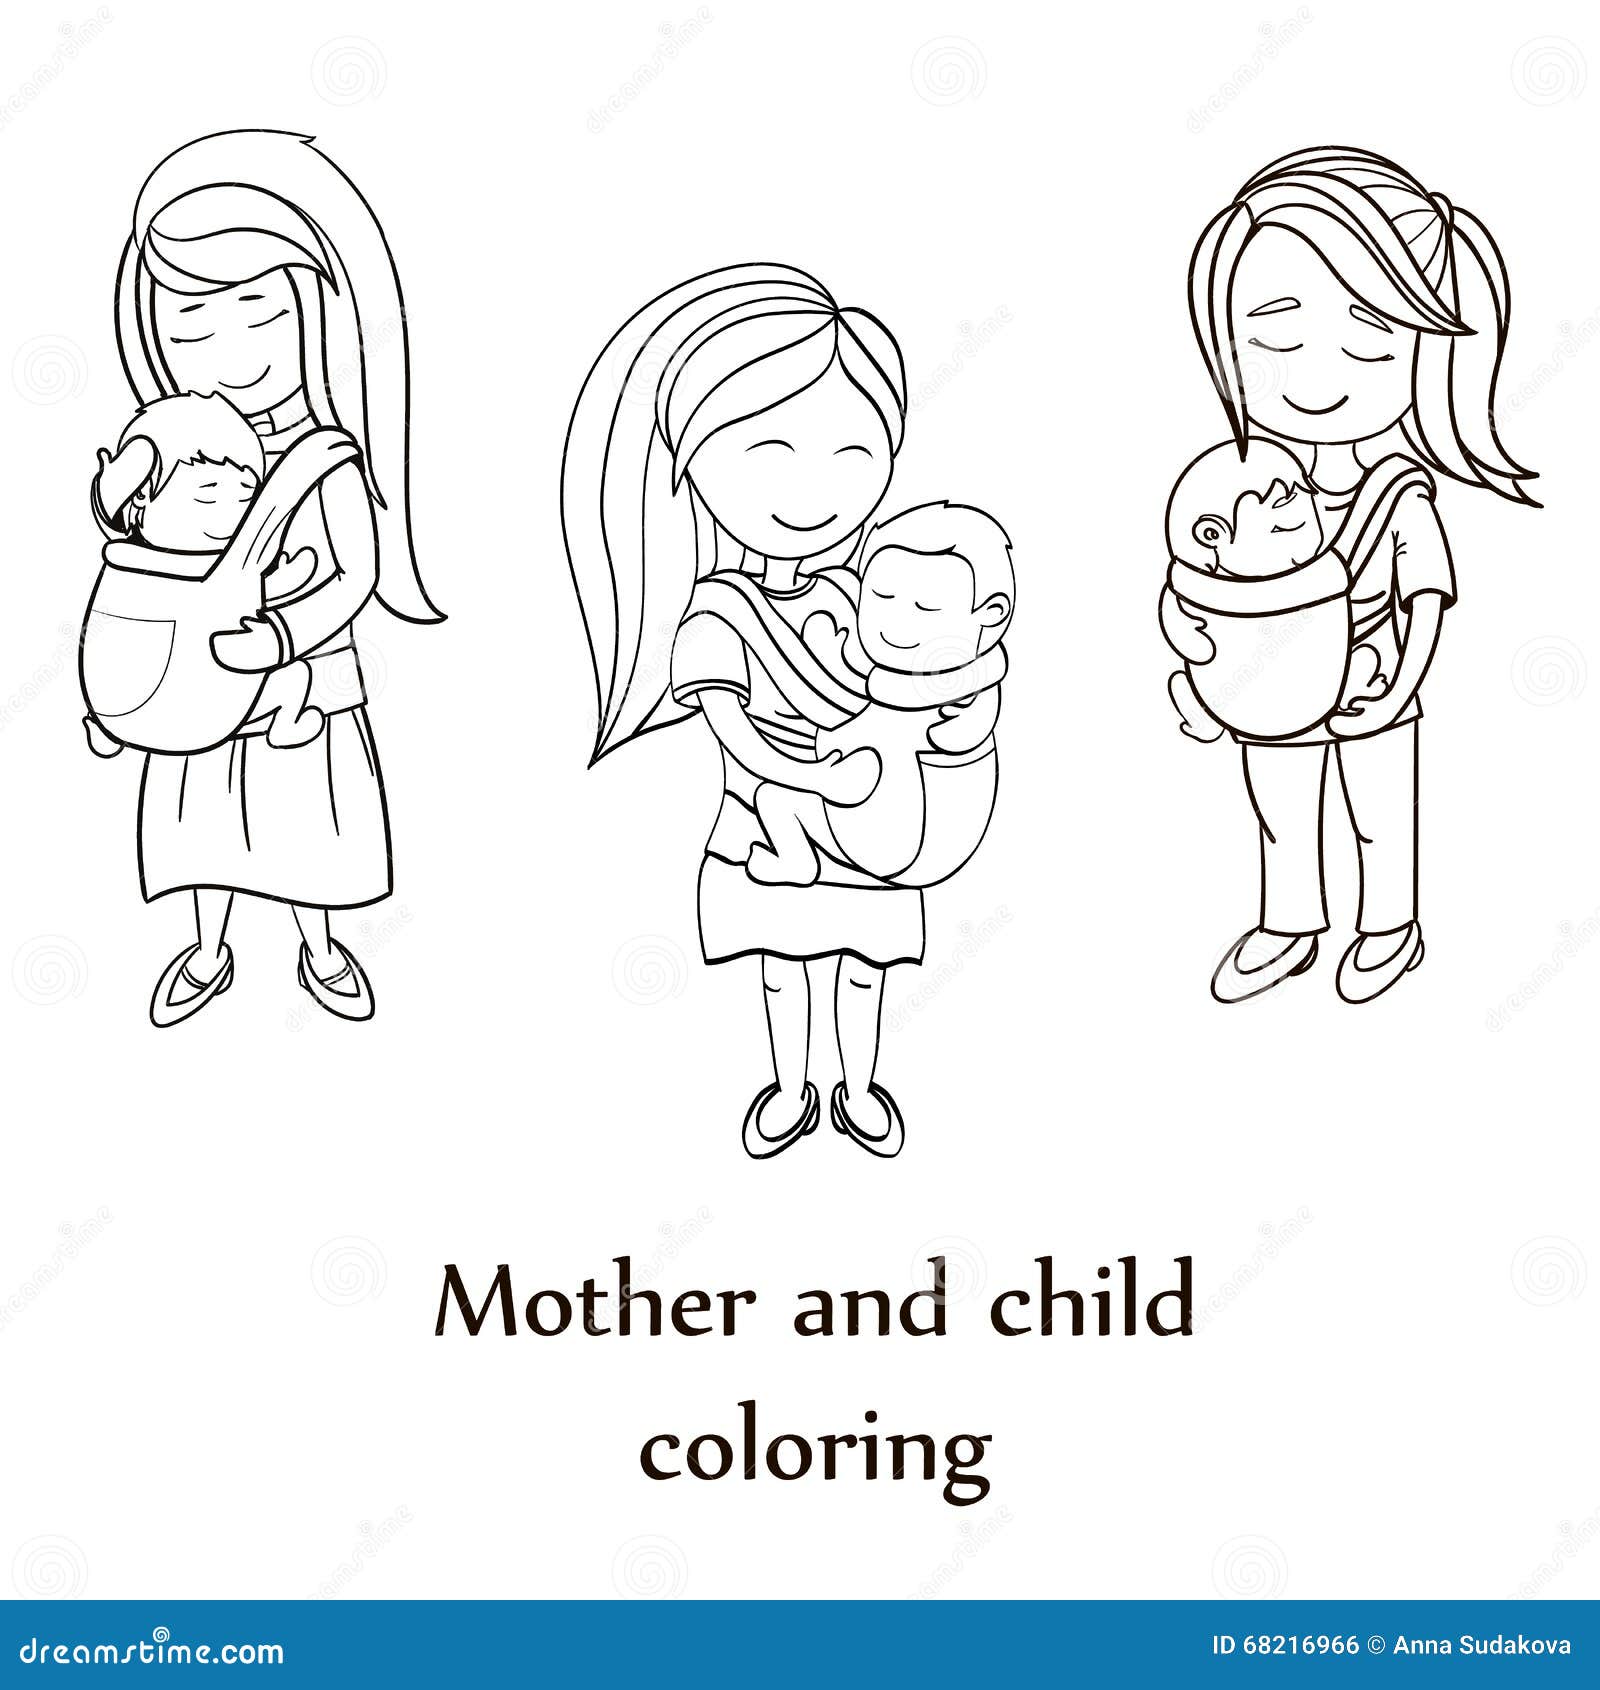 III. How Coloring Books Enhance Communication Between Parents and Children